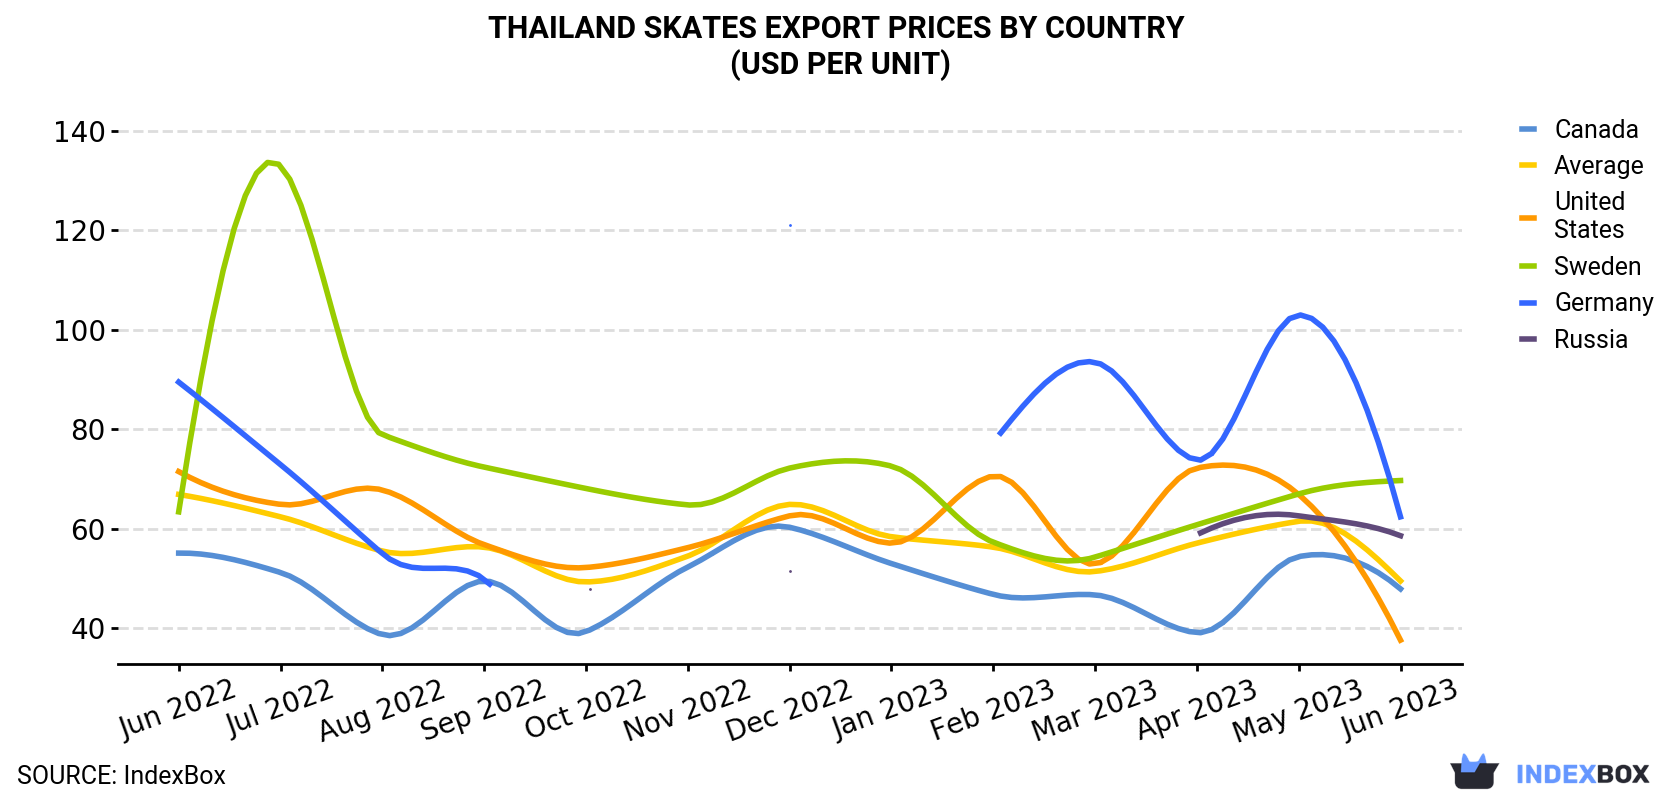 Thailand Skates Export Prices By Country (USD Per Unit)